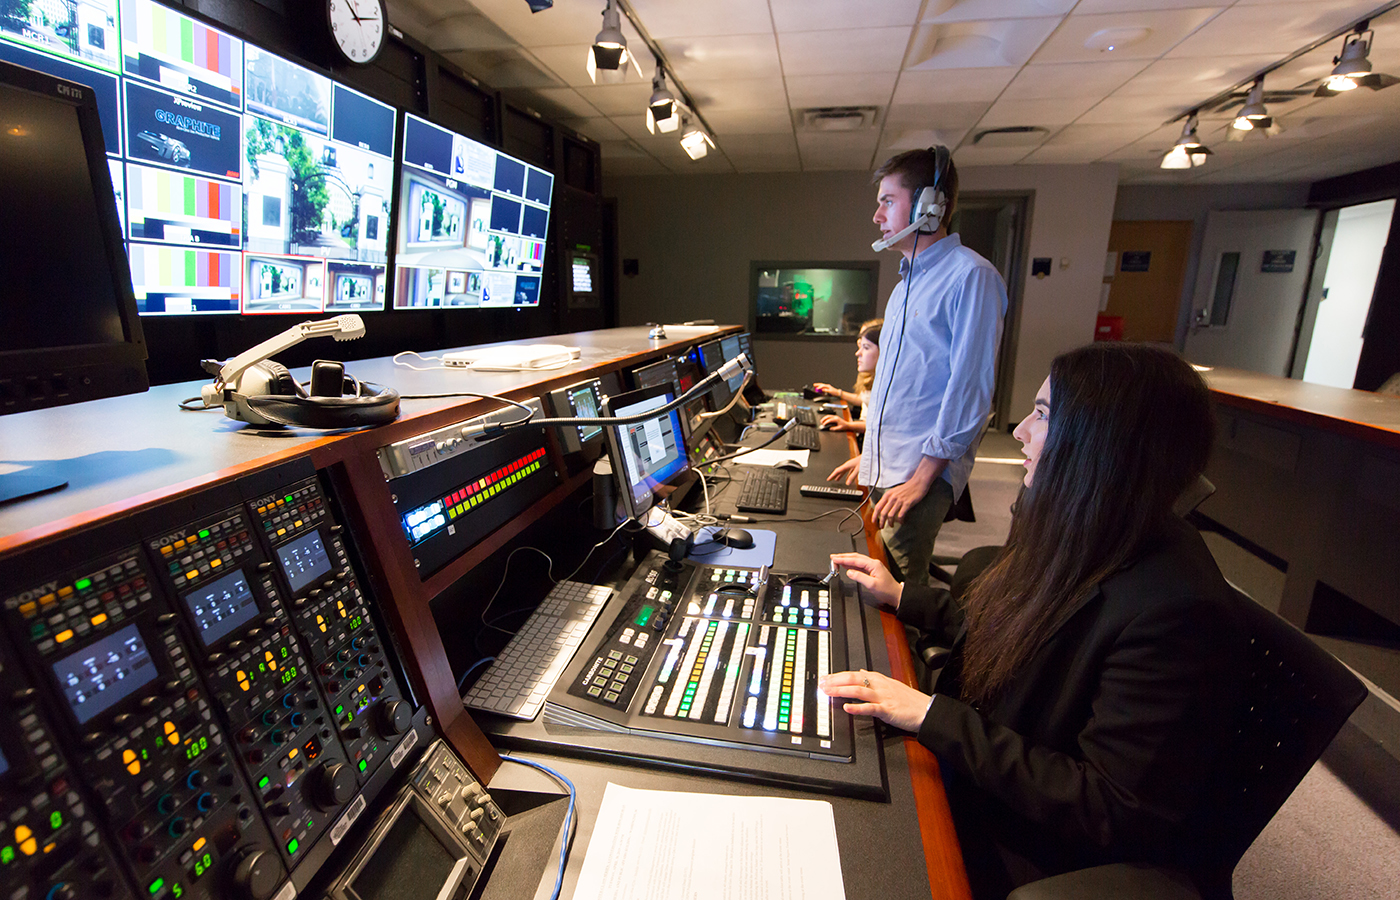 An SMPA studio control room is shown. The IDDP will assist journalists develop stories that correct distorted public narratives.